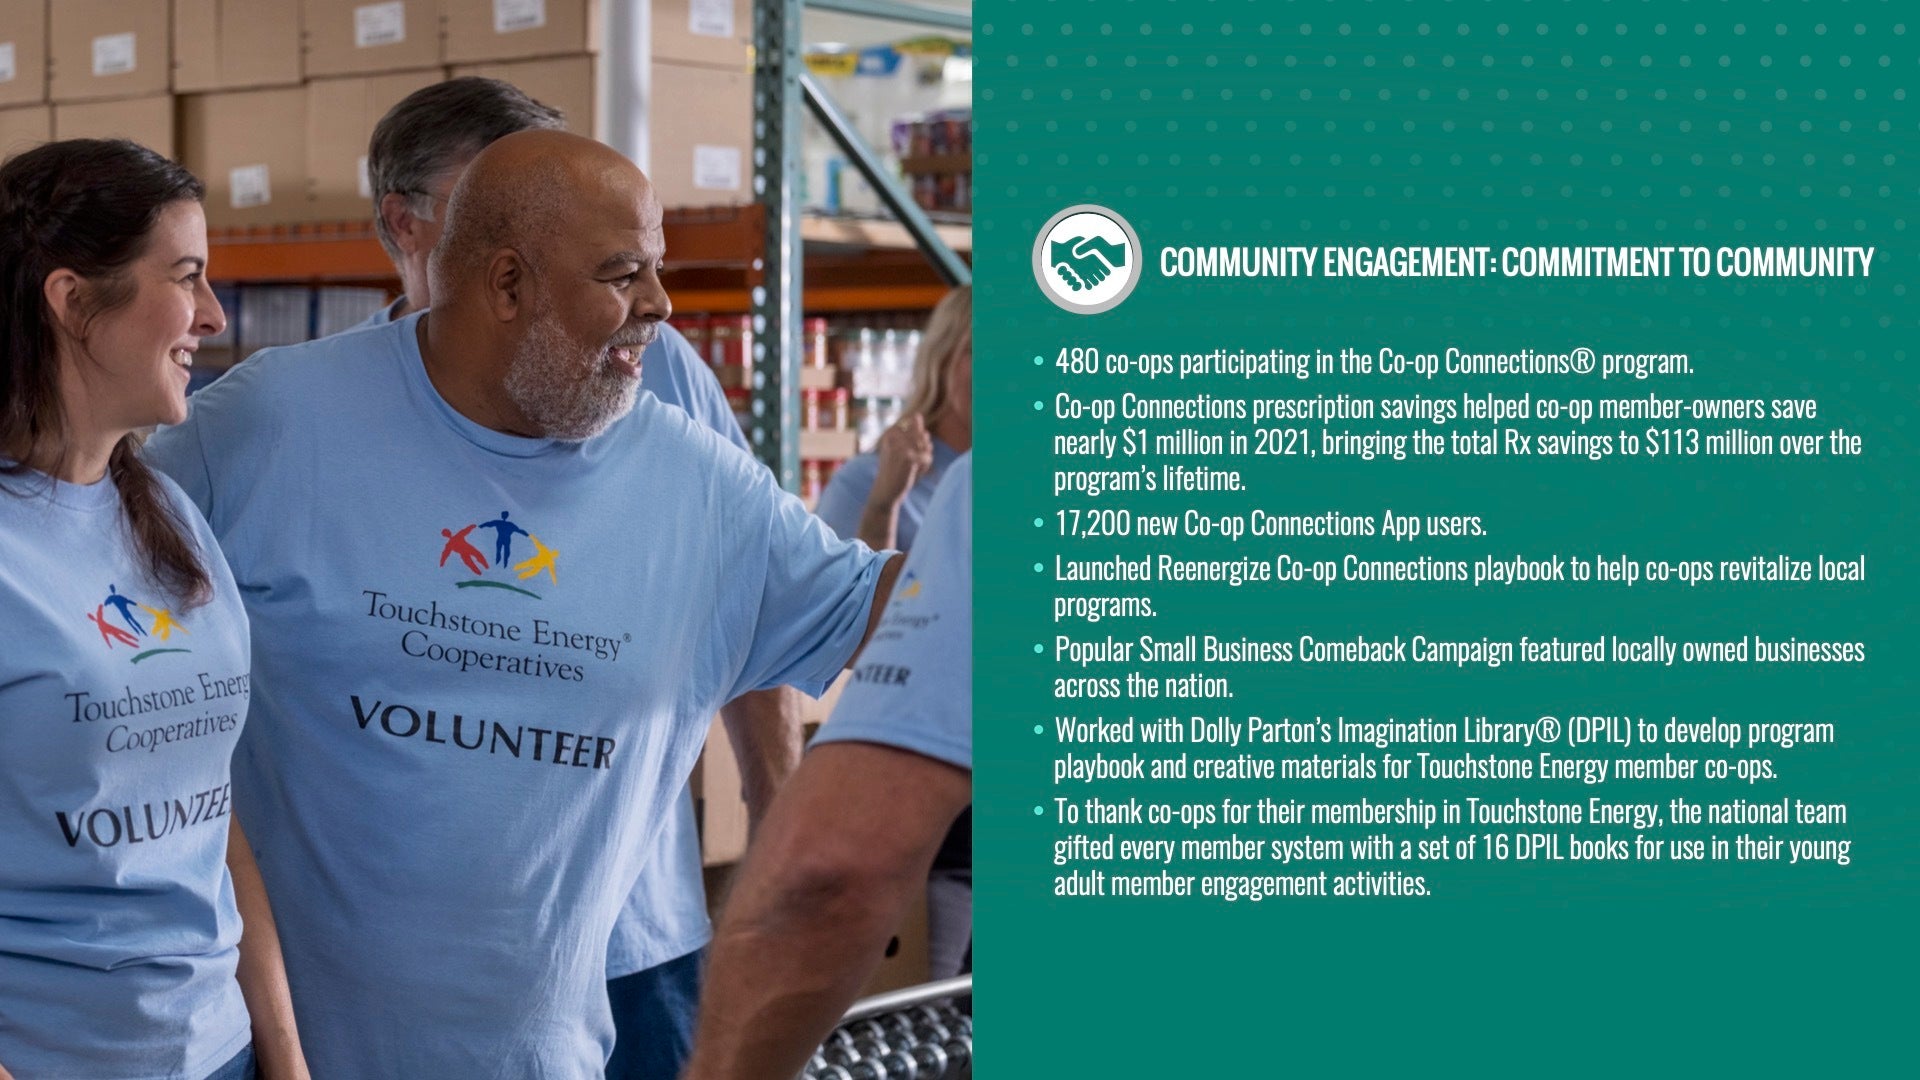 Community Engagement: Commitment to Community